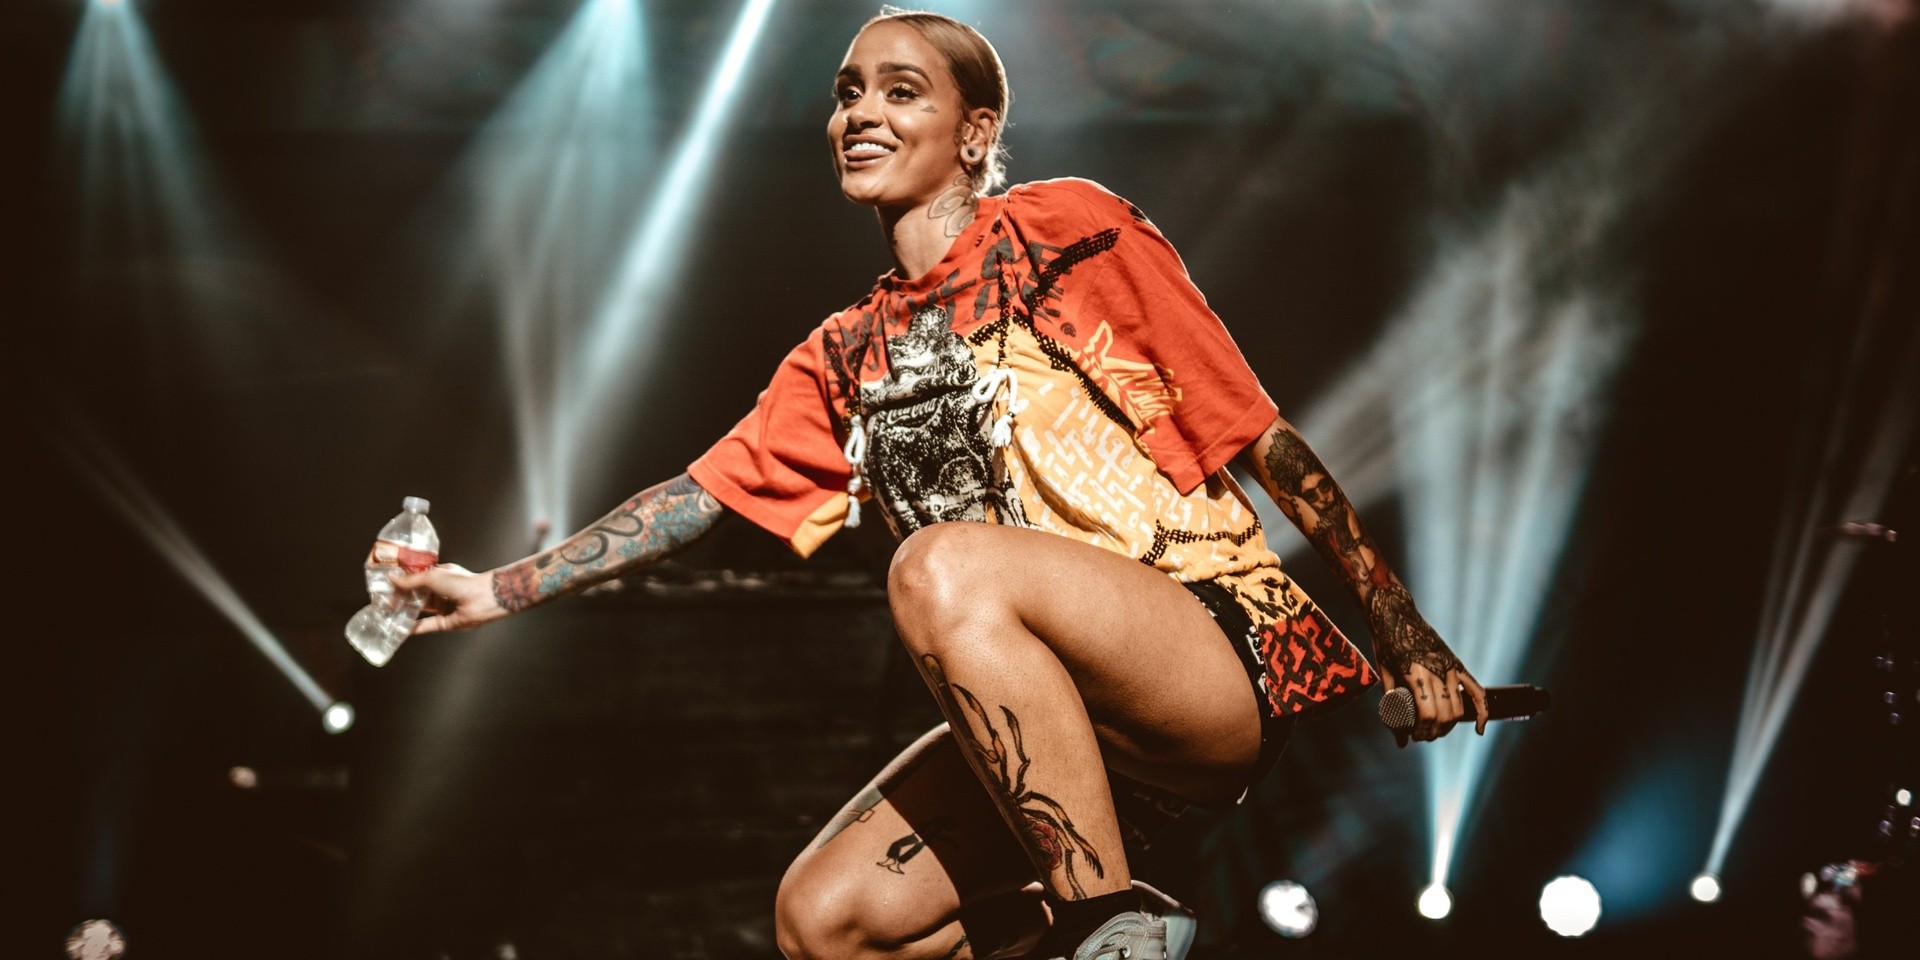 Kehlani in Manila: "I will remember this. I will remember y'all."